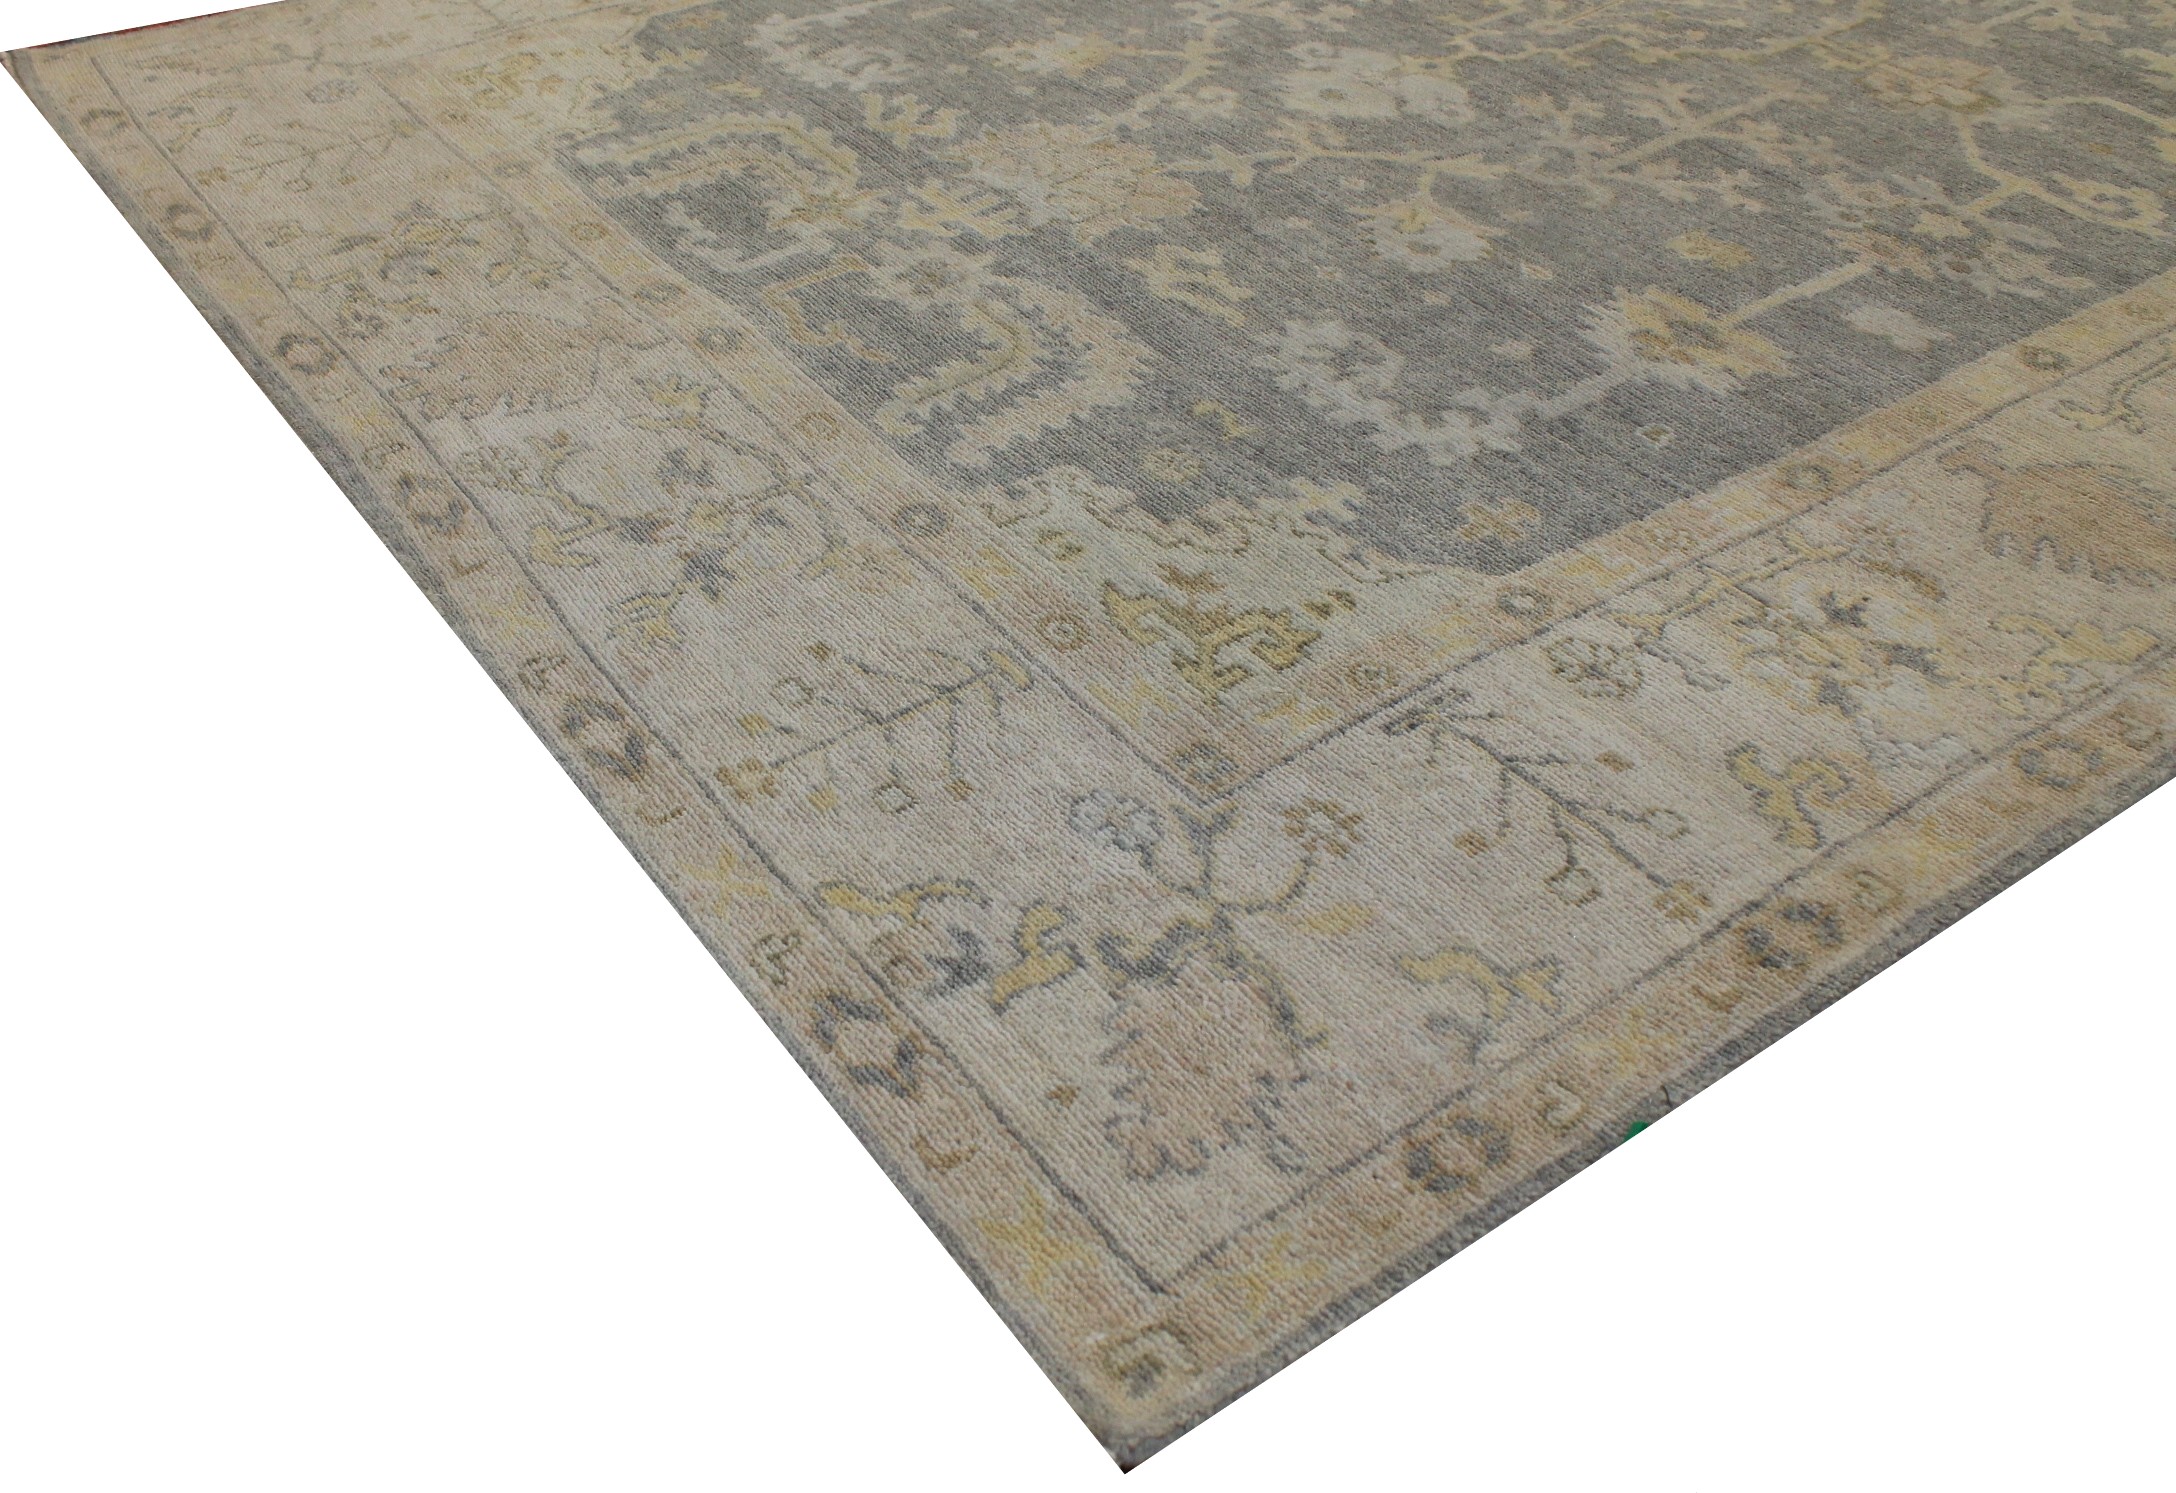 6x9 Oushak Hand Knotted Wool Area Rug - MR026385